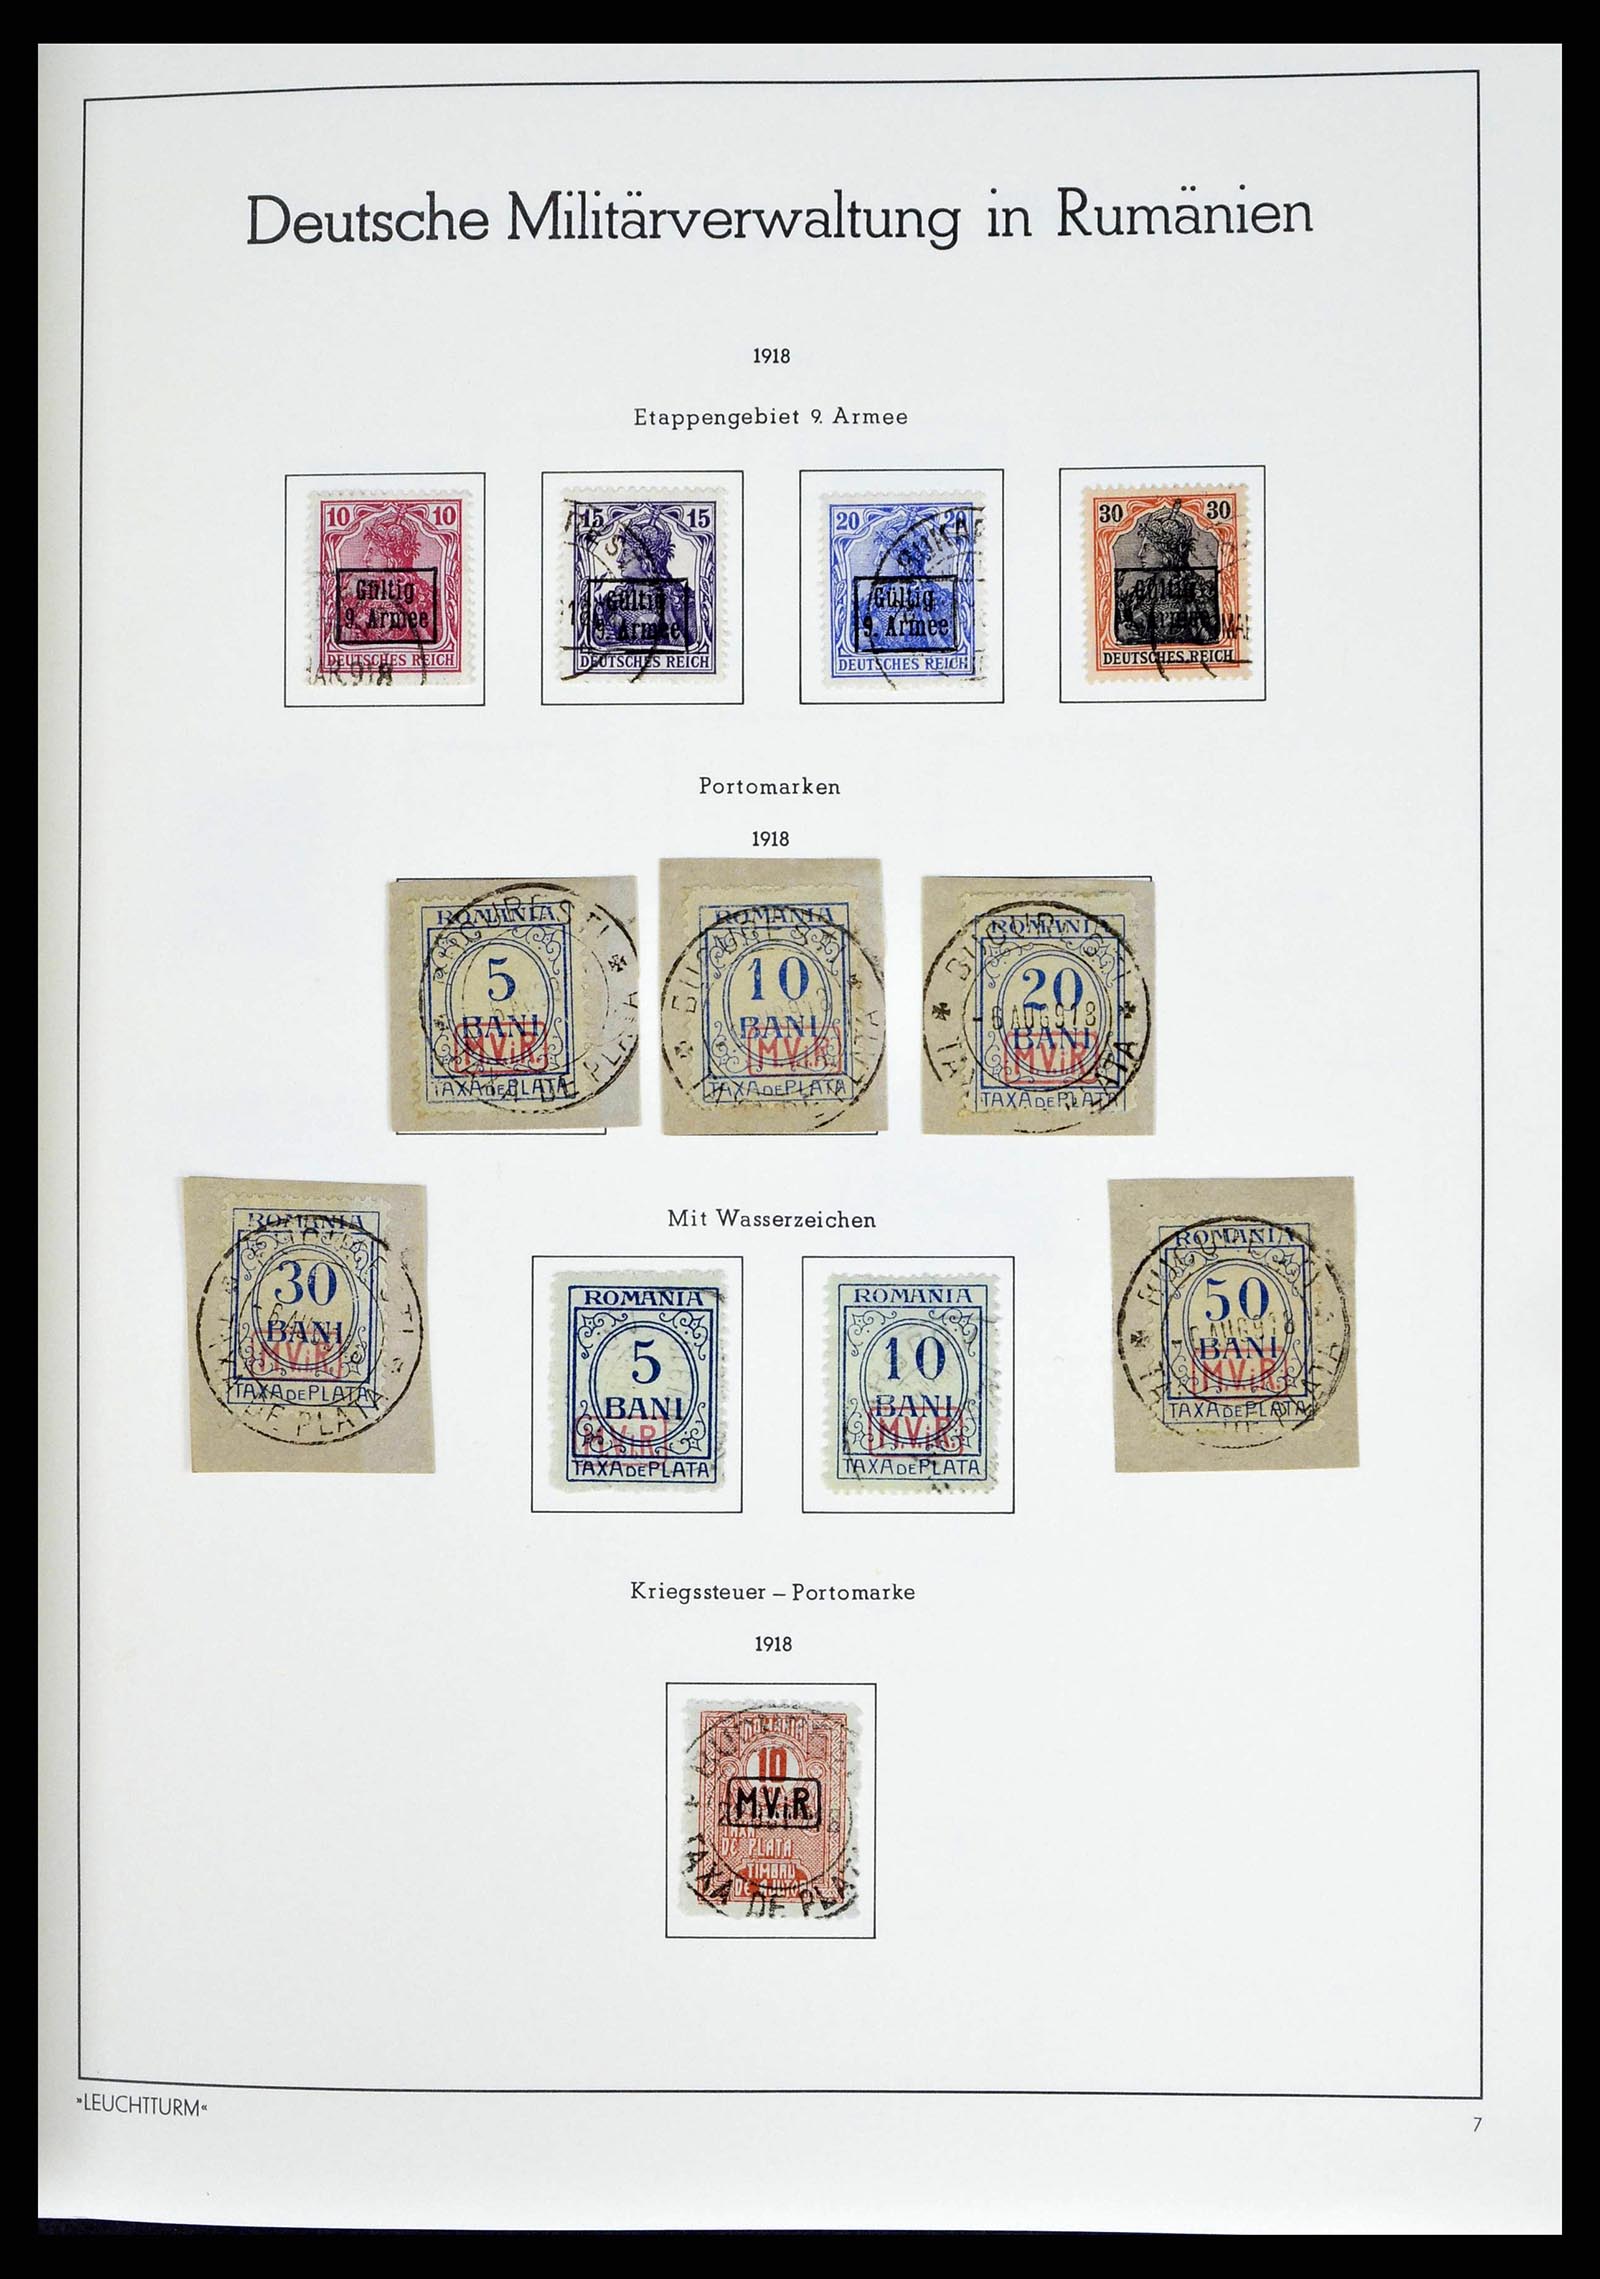 38501 0022 - Stamp collection 38501 German territories and occupations 1920-1945.